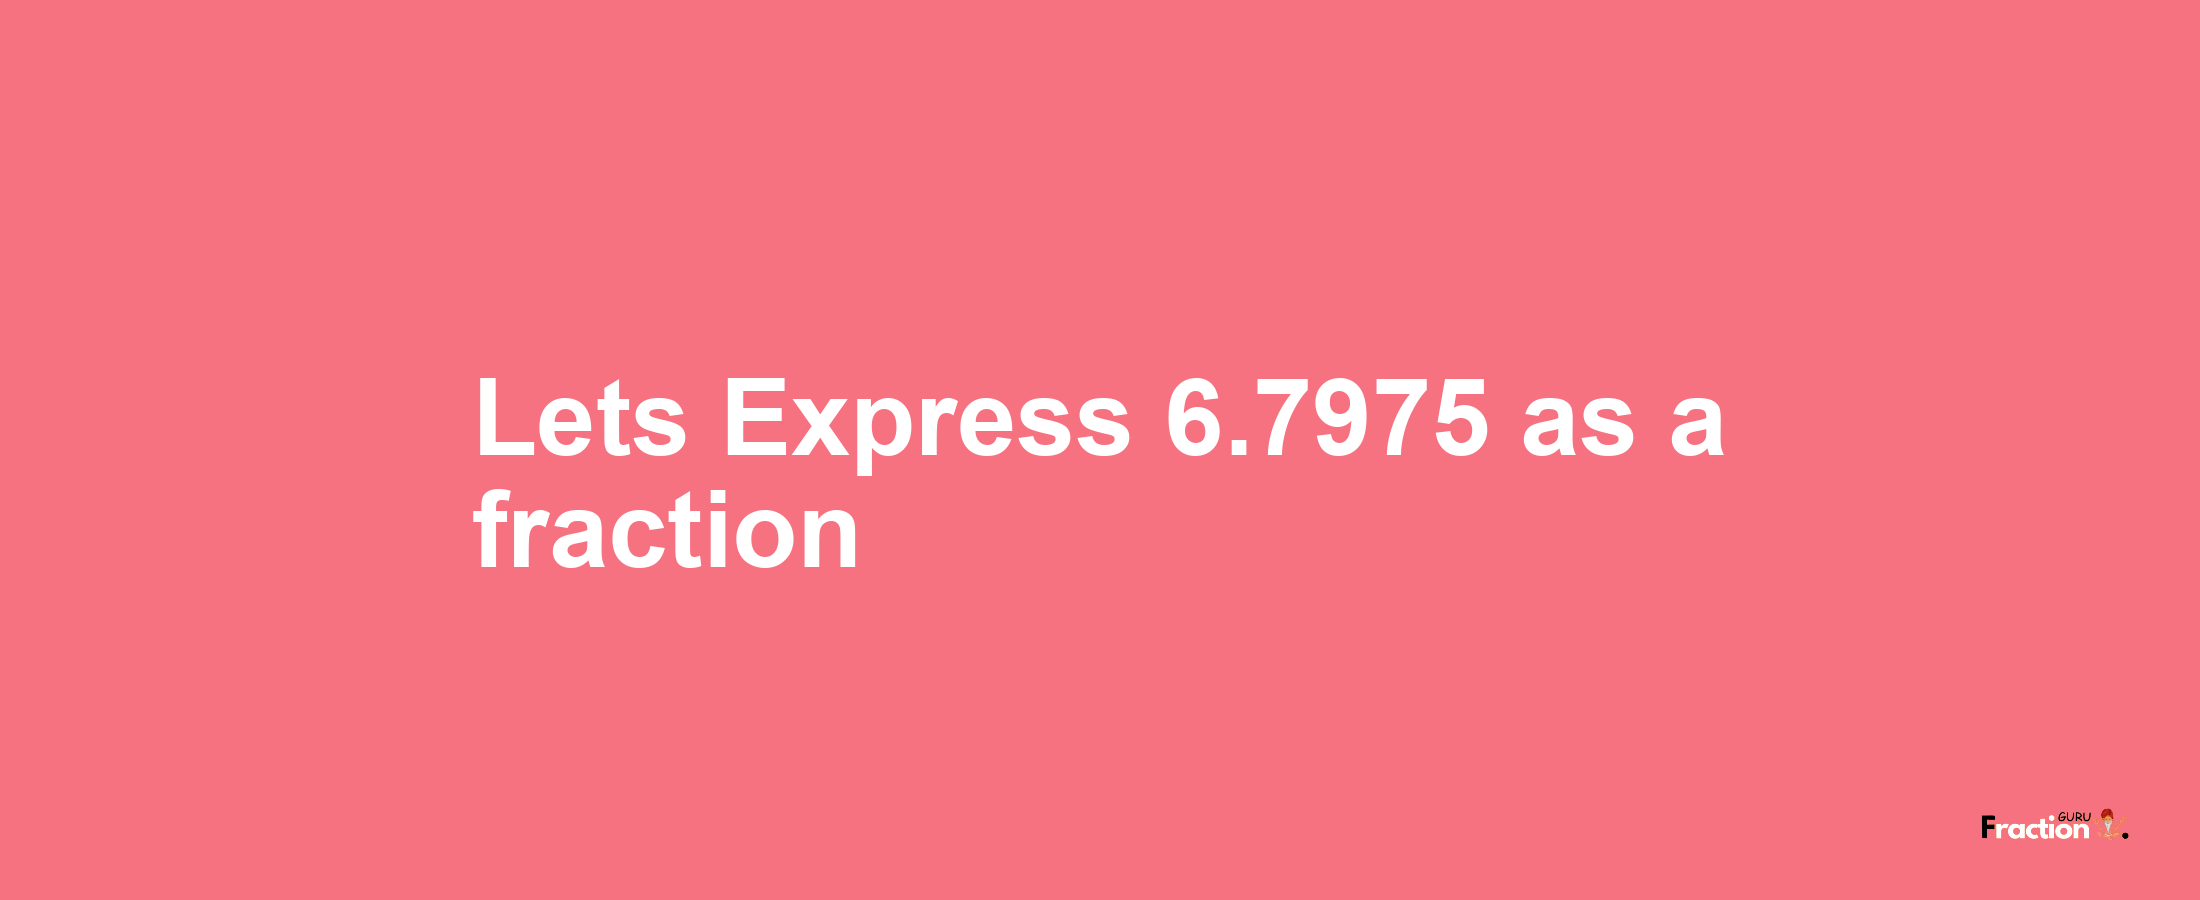 Lets Express 6.7975 as afraction